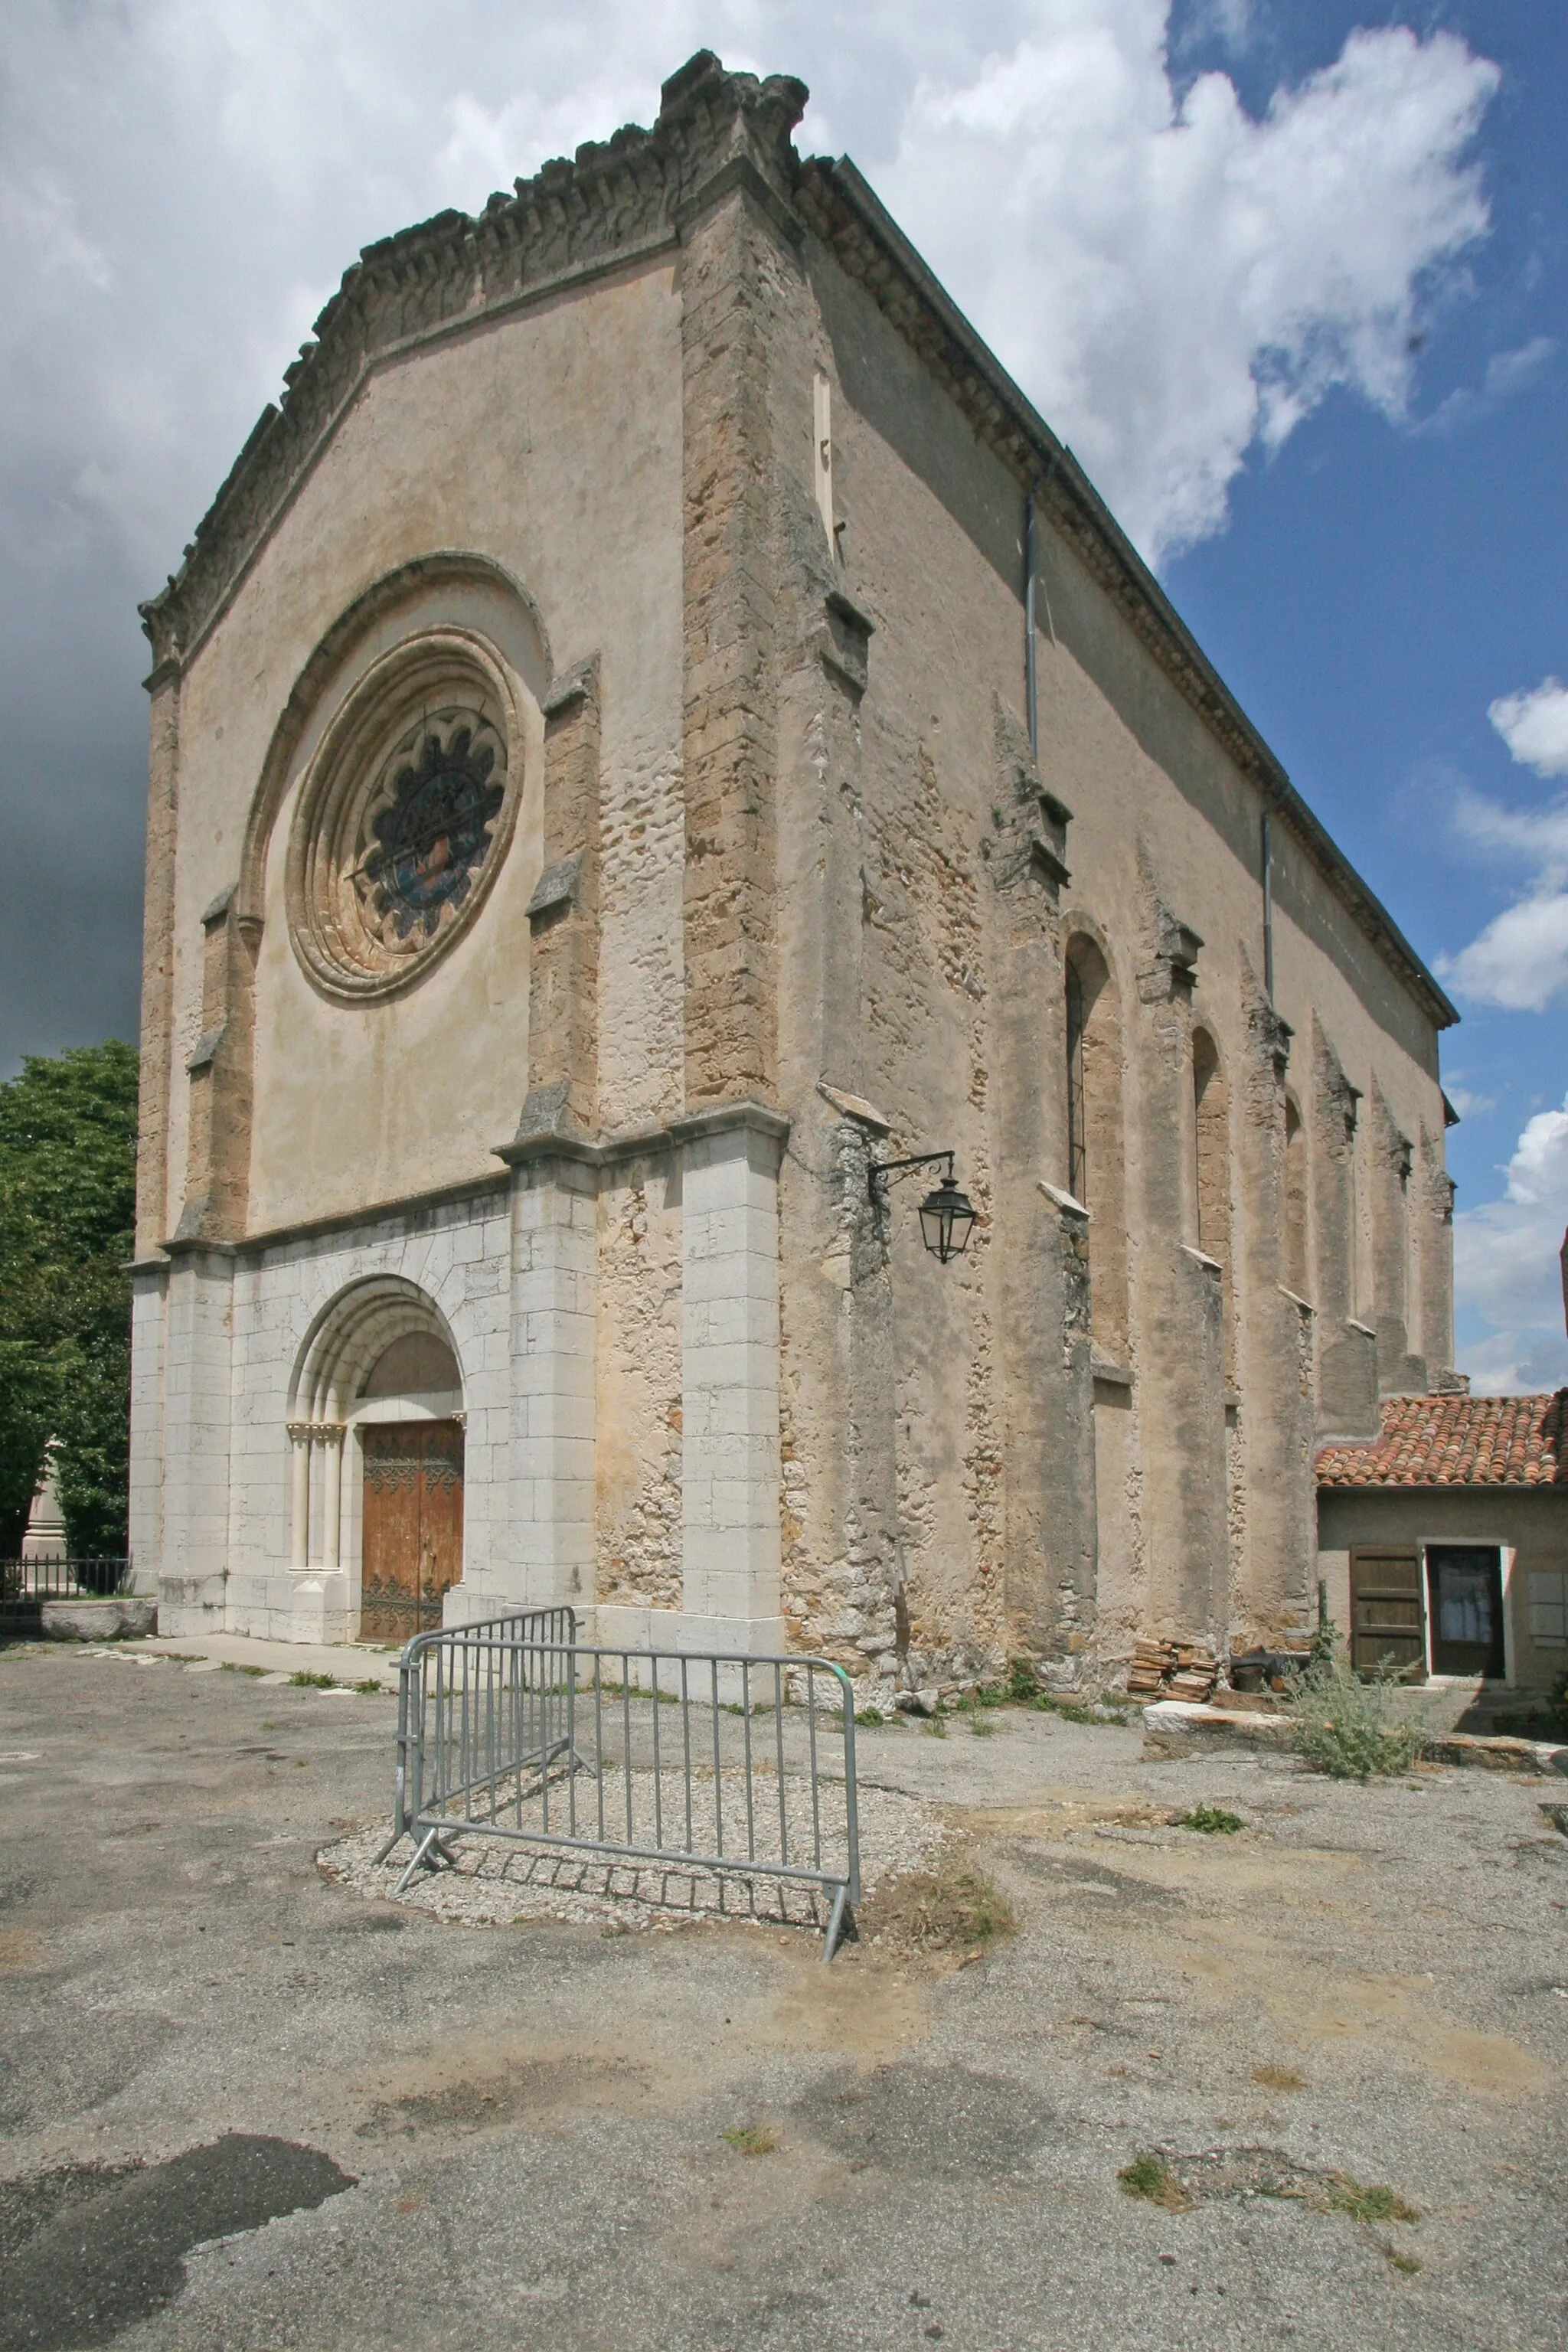 Photo showing: Église Notre-Dame de Vauvert (La Palud-sur-Verdon)
Camera location 43° 46′ 48.04″ N, 6° 20′ 33.01″ E View this and other nearby images on: OpenStreetMap 43.780010;    6.342502